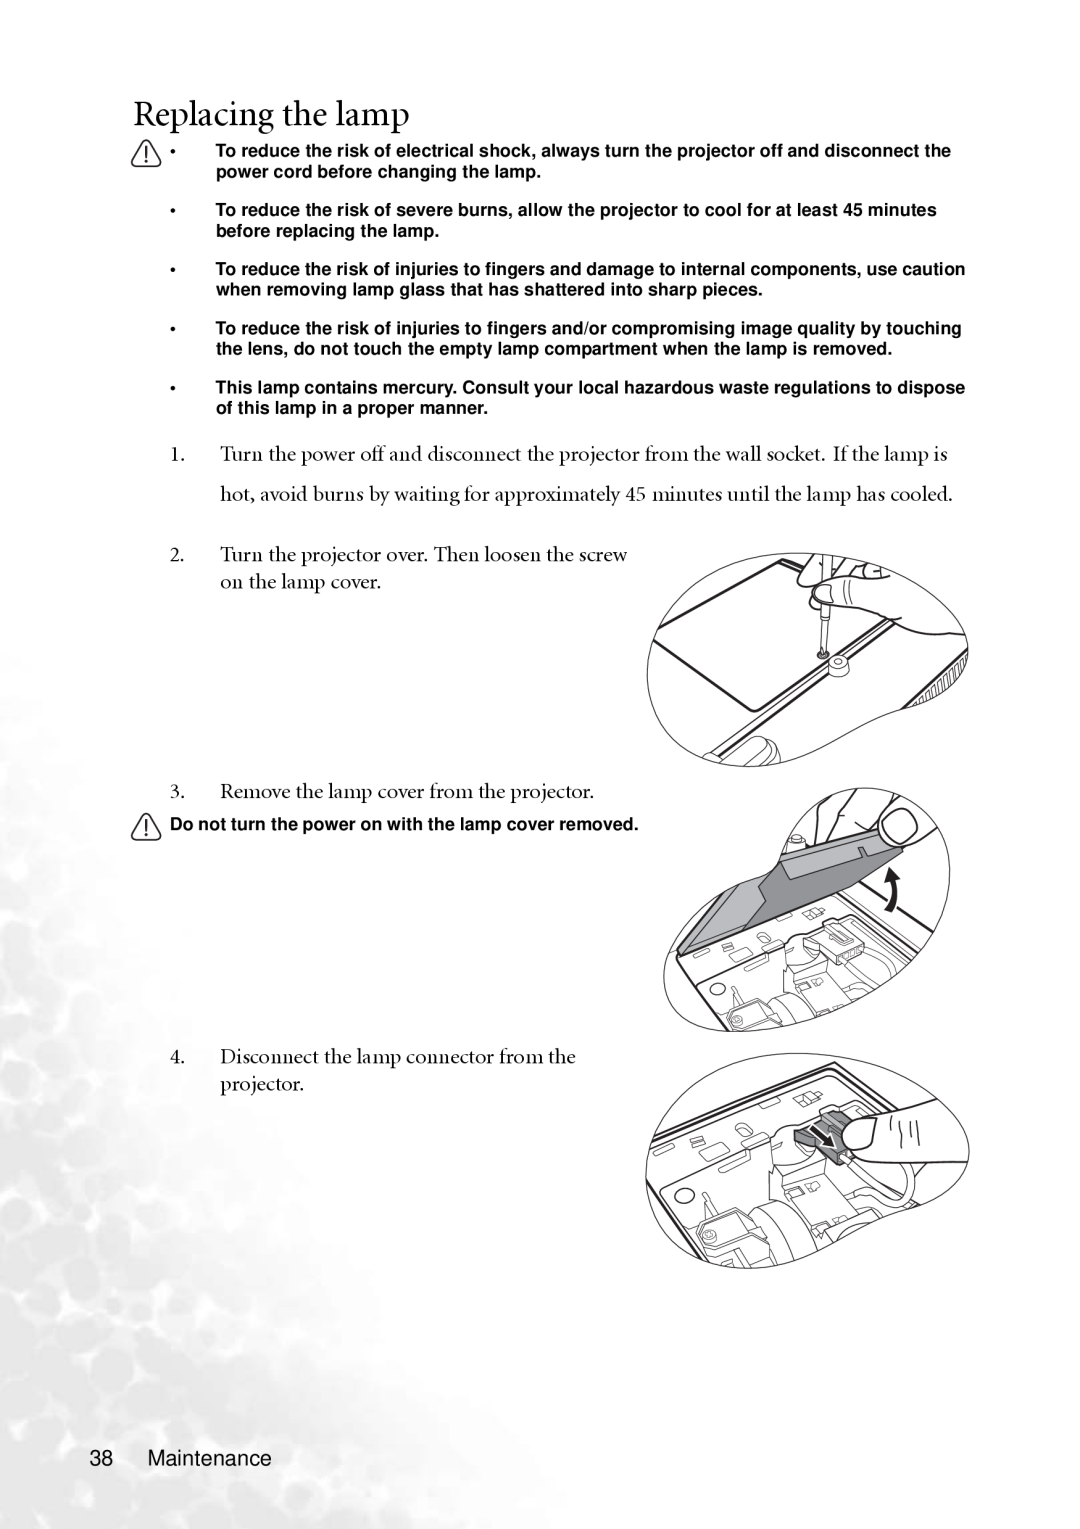 BenQ MP610 user manual Replacing the lamp, Turn the projector over. Then loosen the screw on the lamp cover, Maintenance 